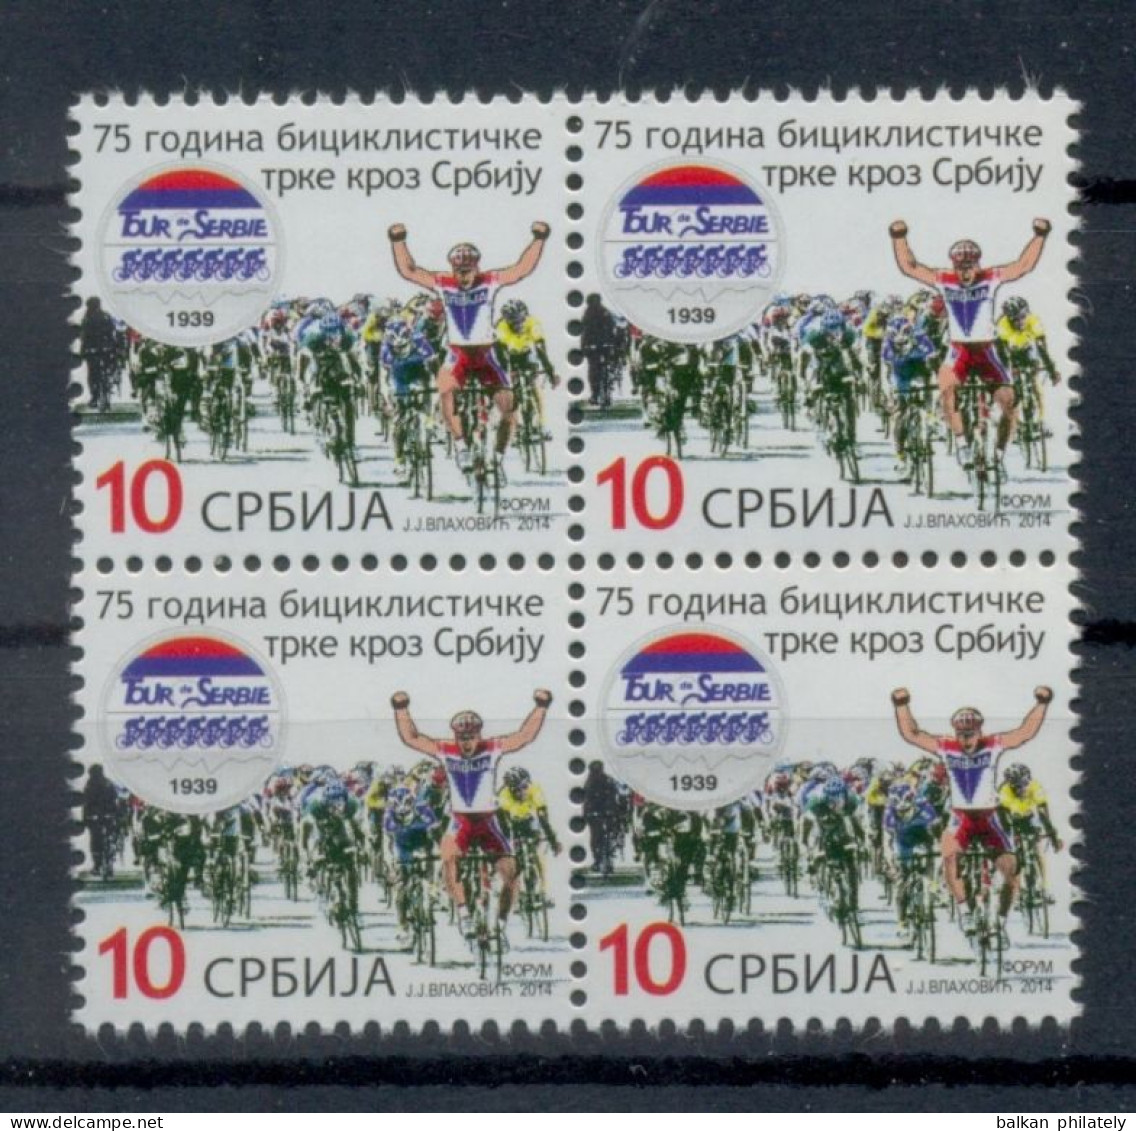 Serbia 2014 75 Years Of Cycling Racing Through Serbia Tour De Serbie Sports Tax Charity Surcharge MNH - Serbia